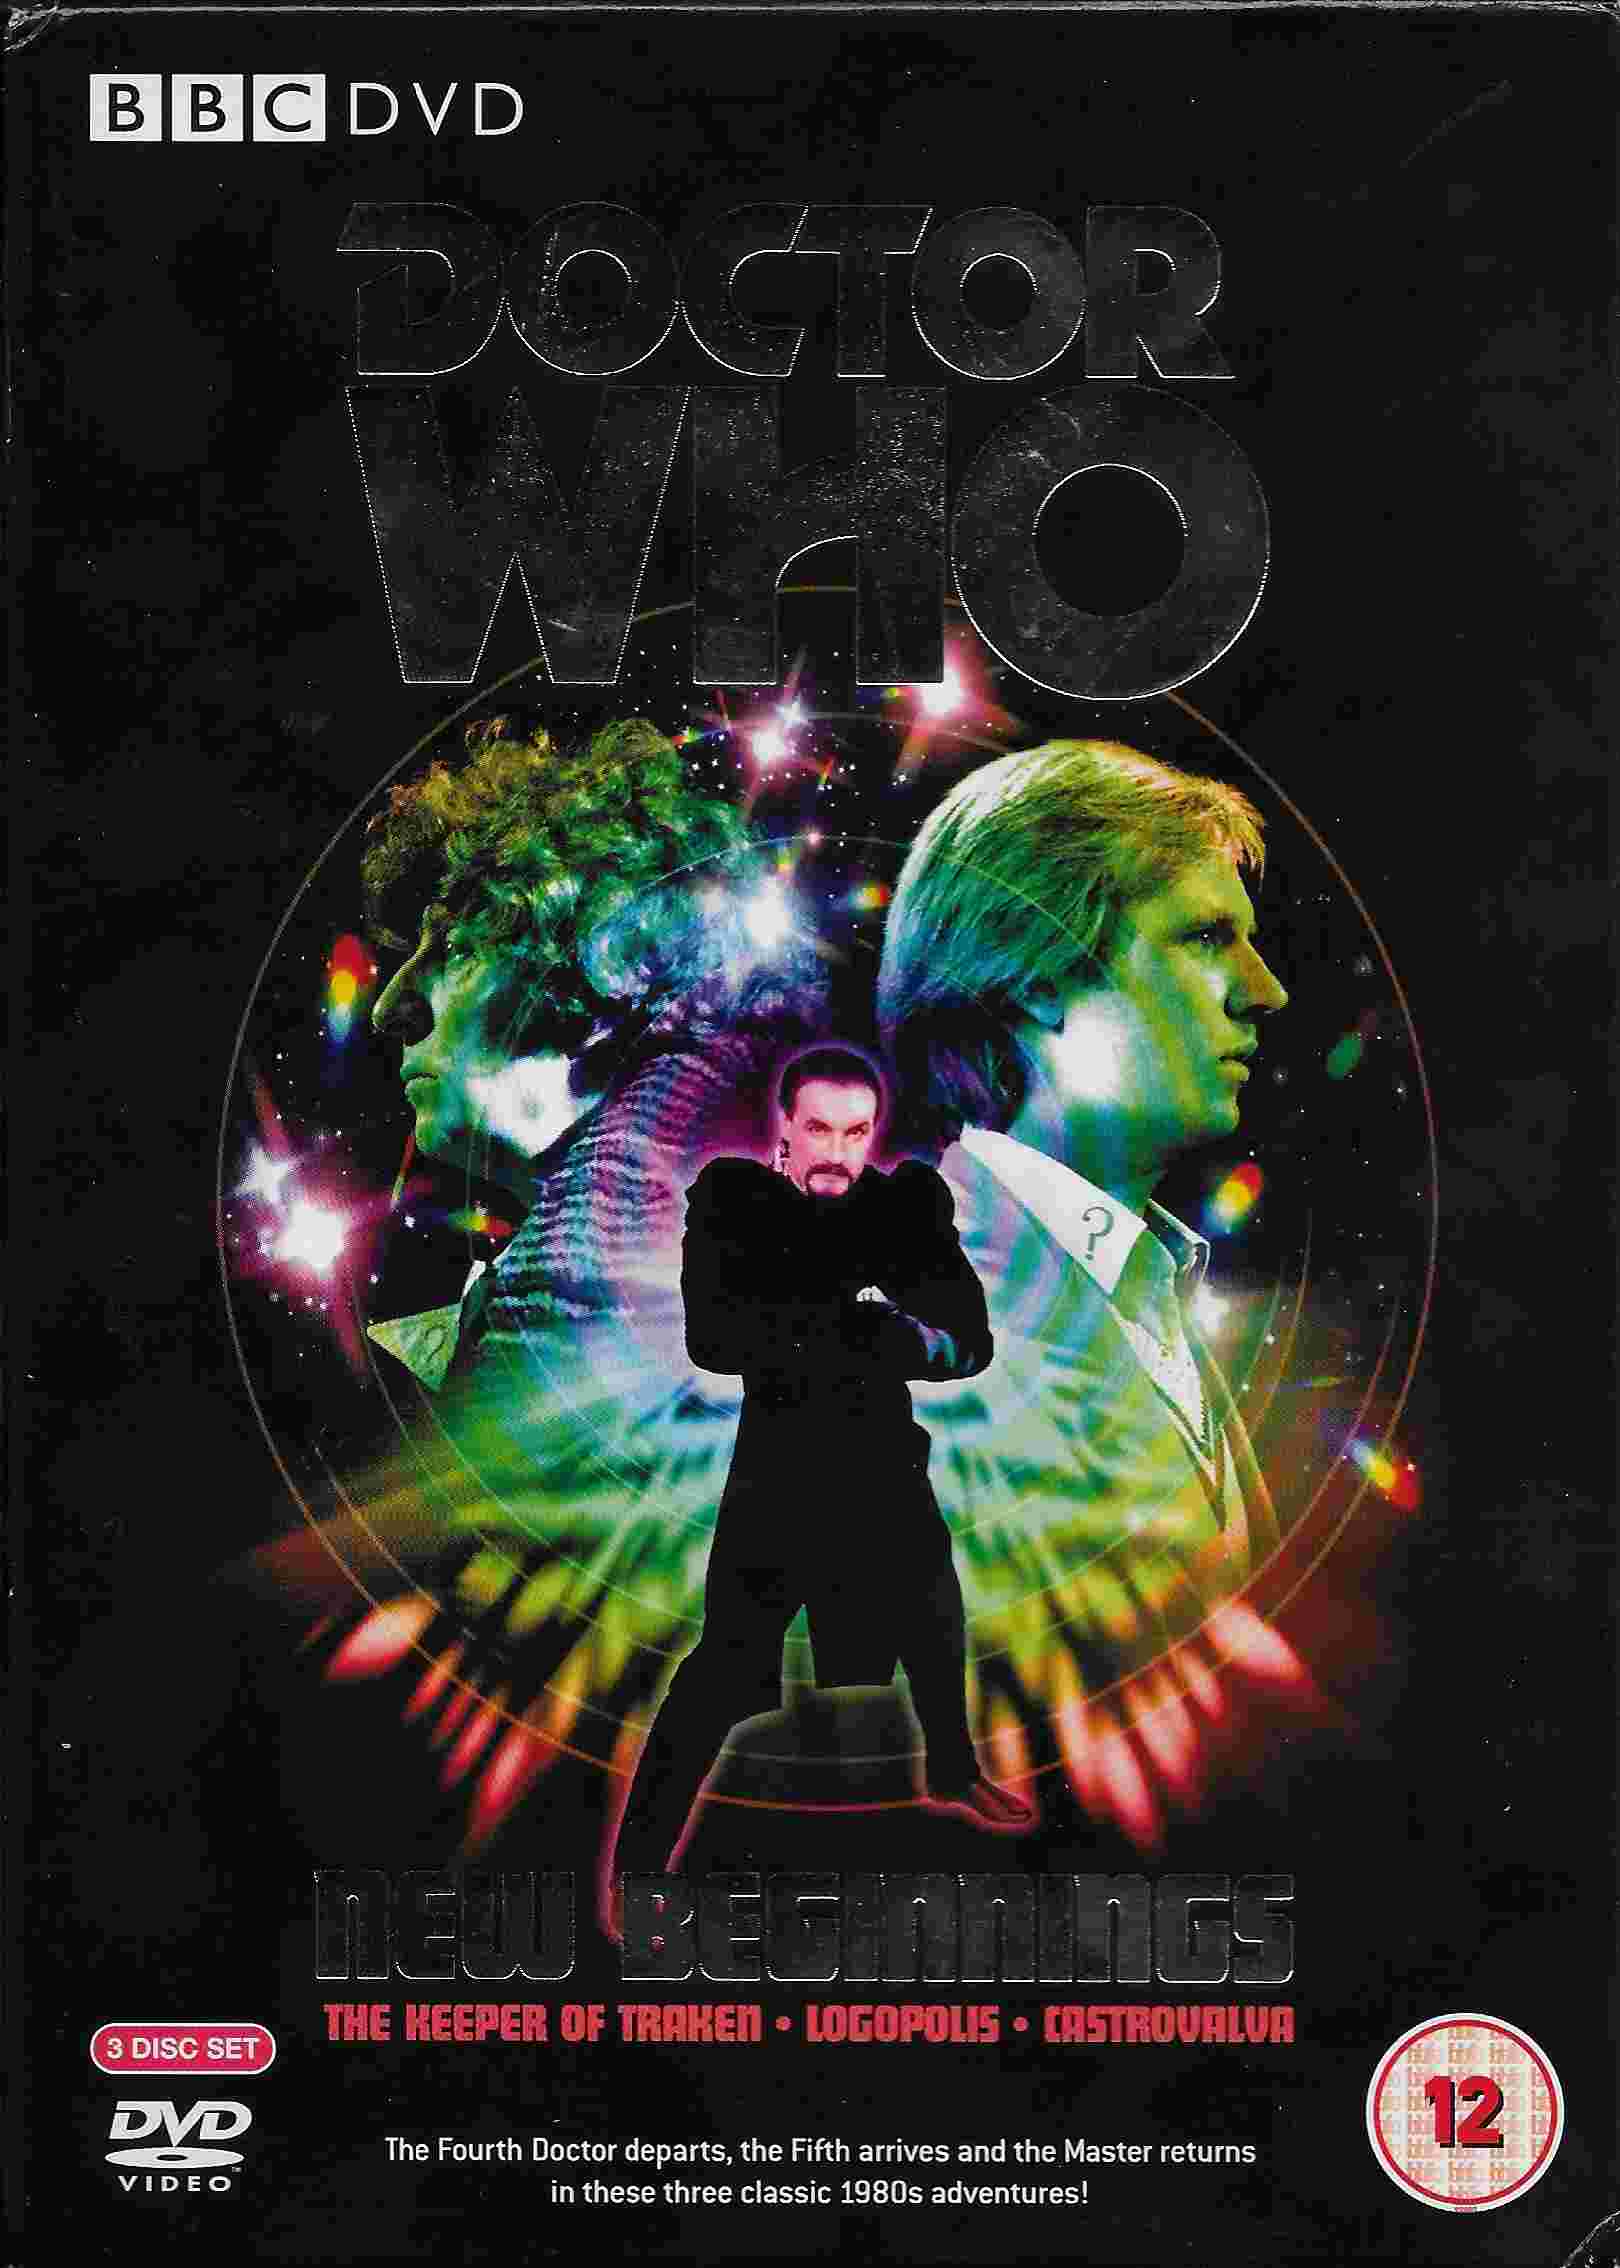 Picture of BBCDVD 1331 Doctor Who - New beginnings by artist Johnny Byrne / Christopher H Bidmead from the BBC records and Tapes library